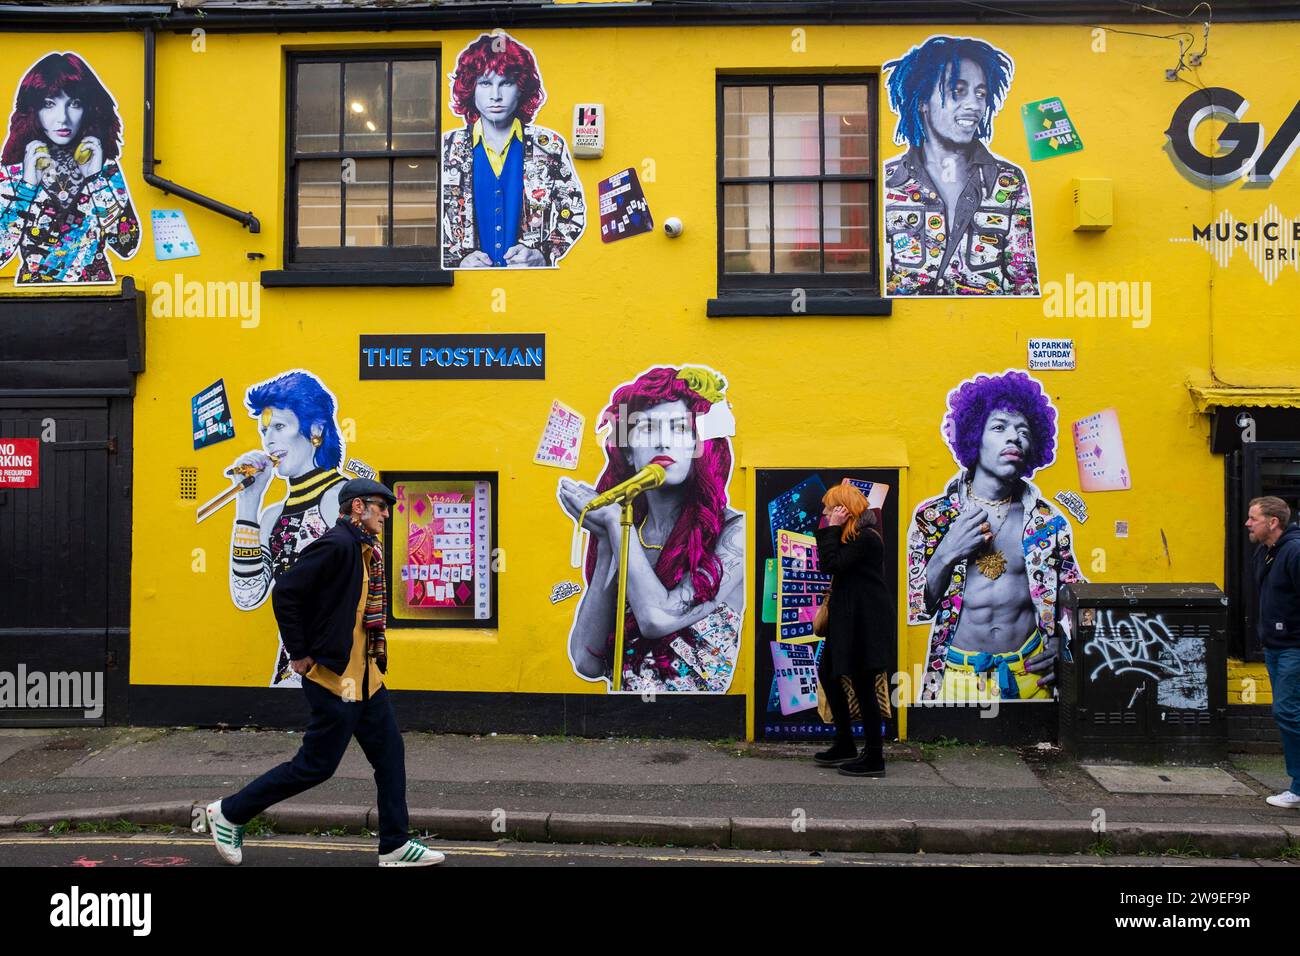 Mural of artwork by The Postman depicting famous musicians at the Guitar Amp & Keyboard store (GAK) in the North Laine district of Brighton UK . The Postman are an anonymous artist whose work can be seen around the city   Credit Simon Dack Stock Photo